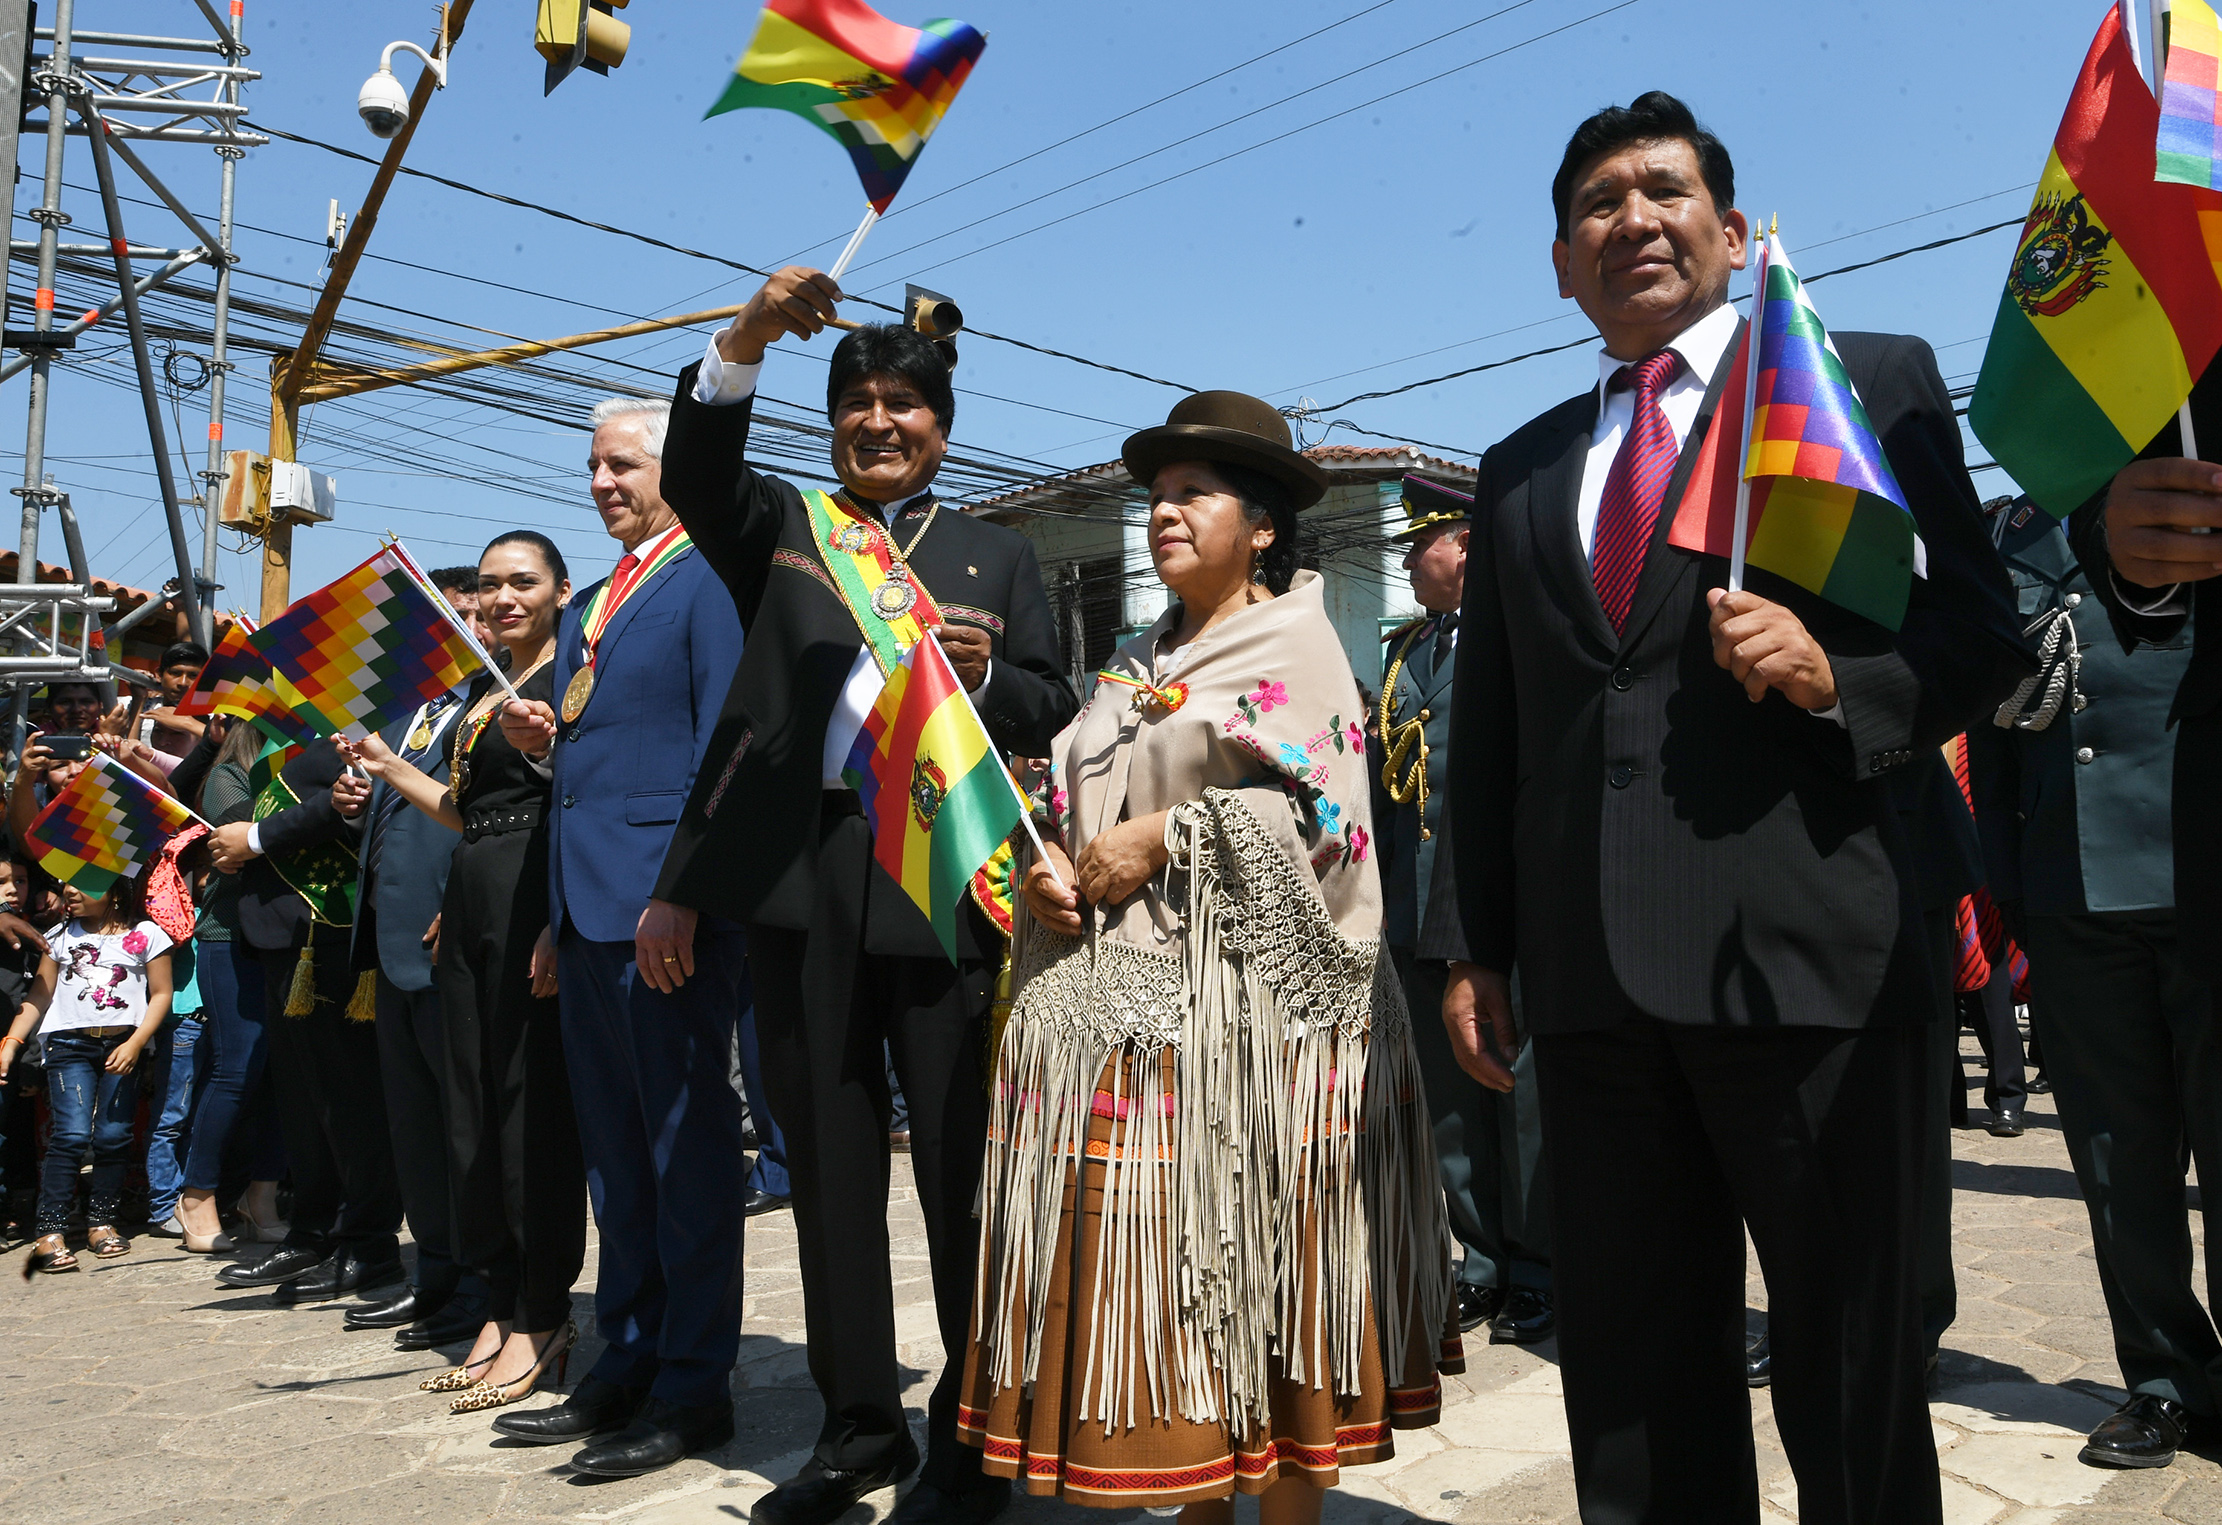 Evo Morales with senior minister at Independence day celebrations on Tuesday.